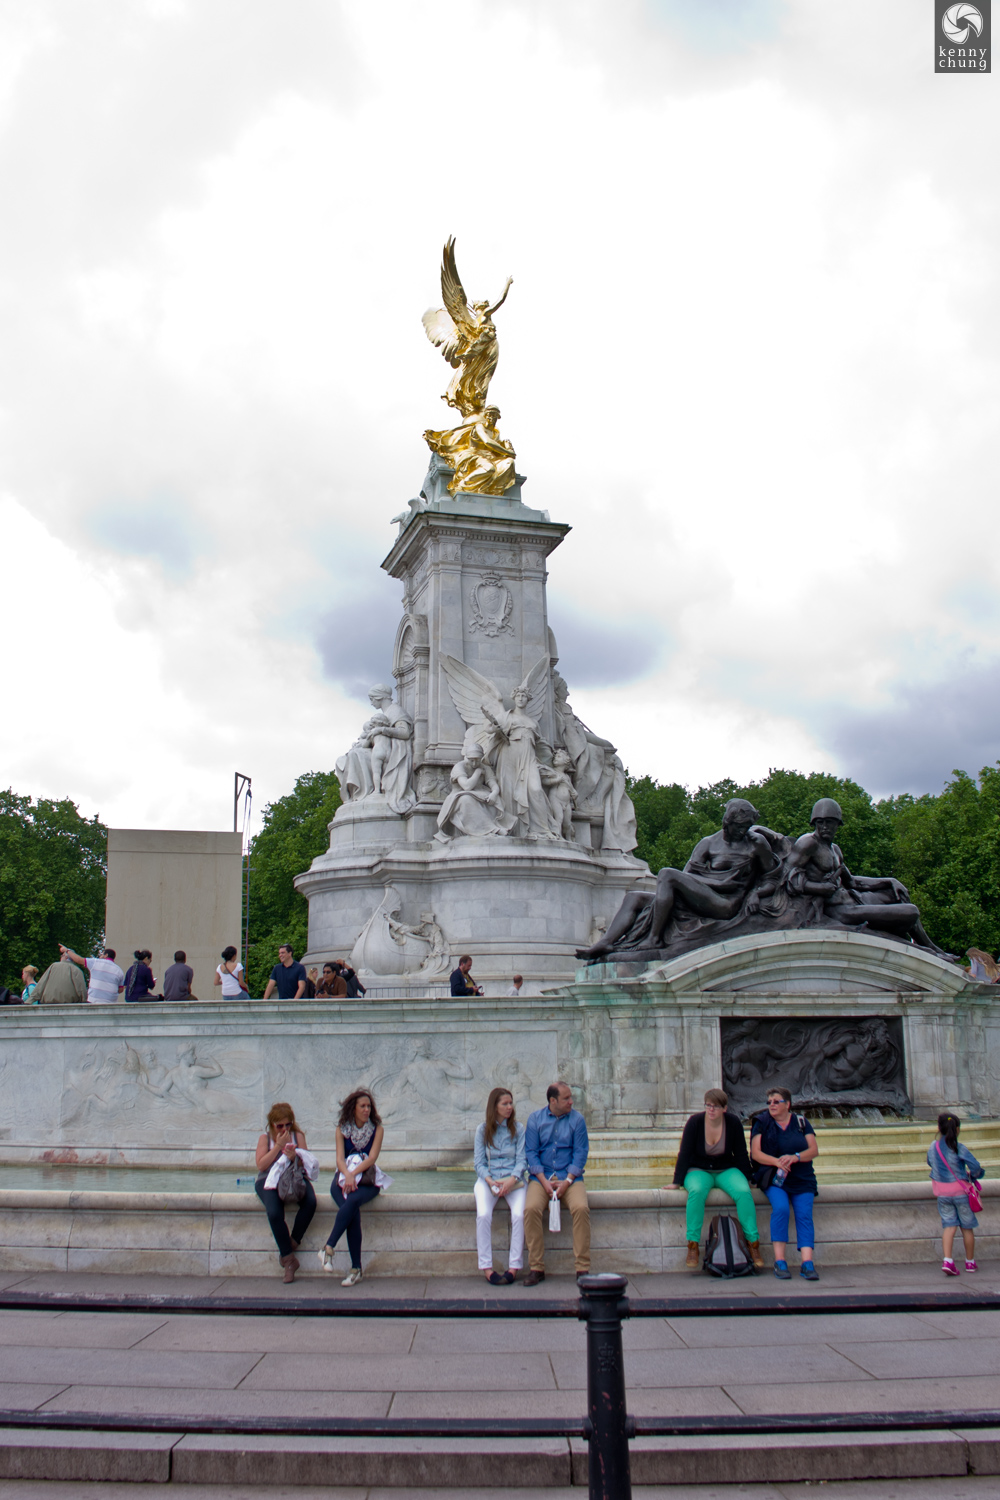 The Victoria Memorial statue across from Buckingham Palace in London